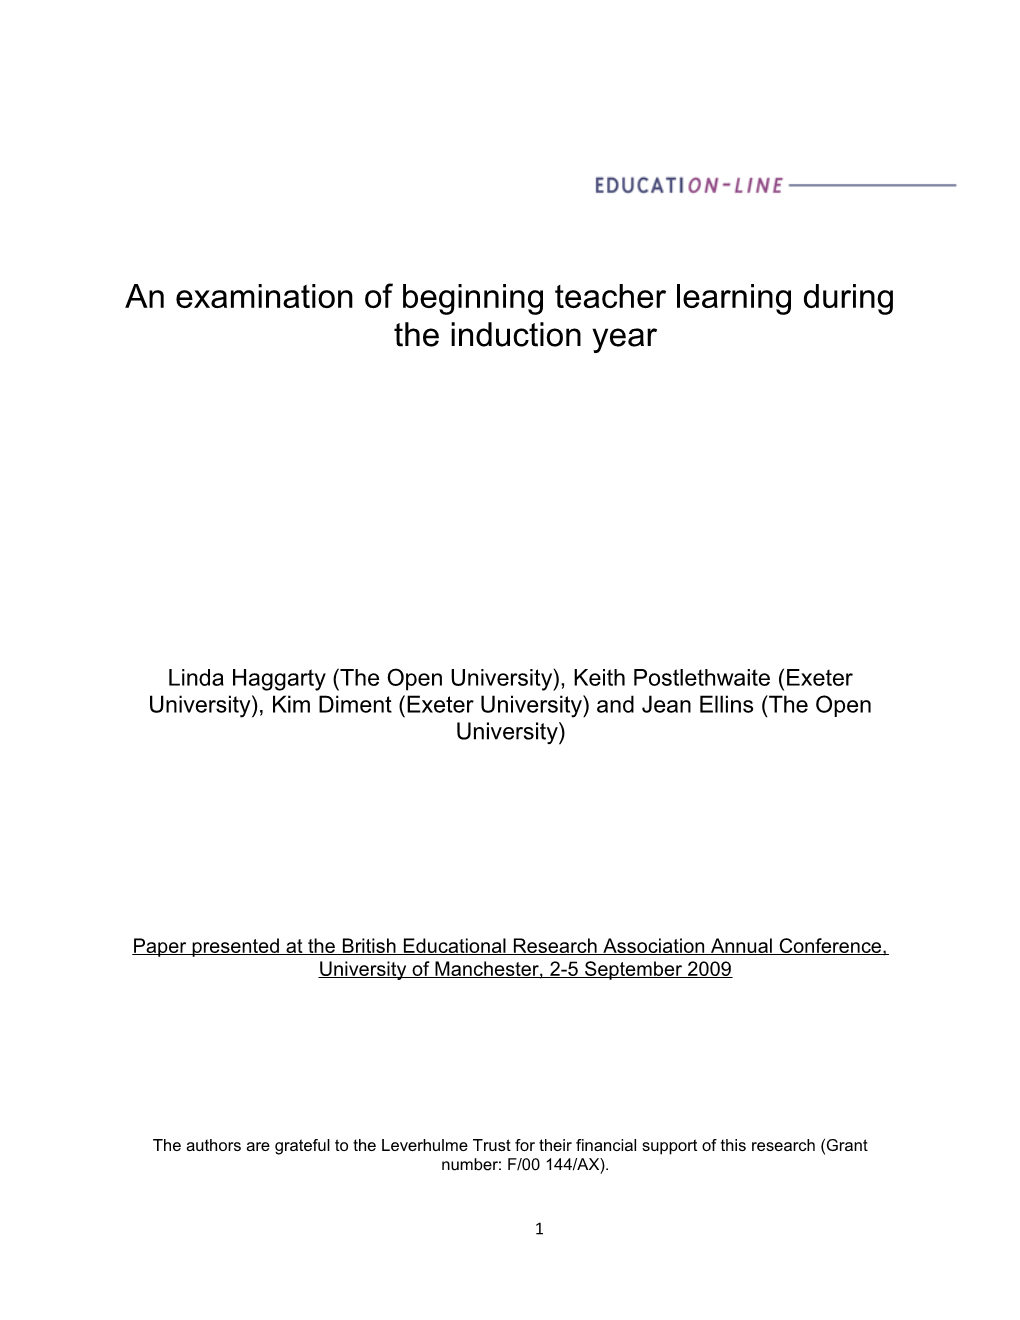 An Examination of Beginning Teacher Learning During the Induction Year